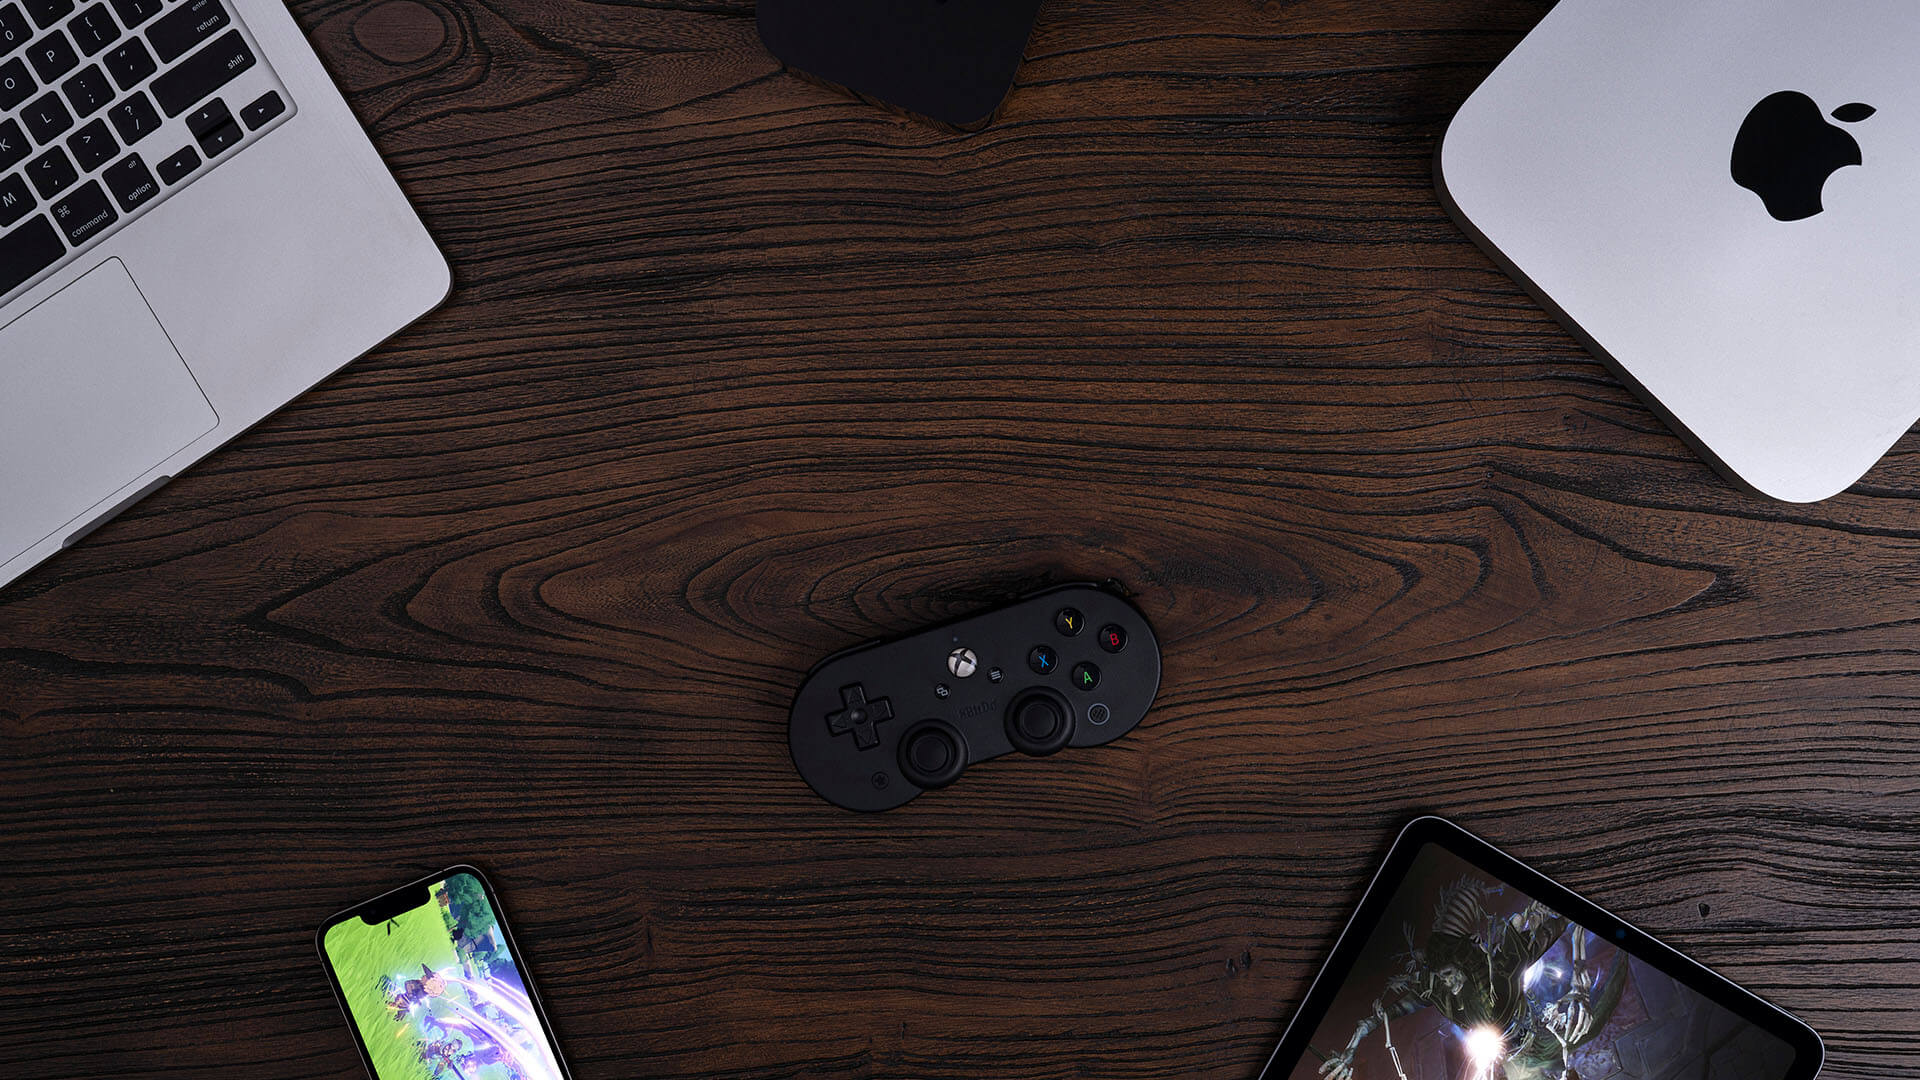 8Bitdo Sn30 Pro for Xbox cloud gaming on Android (includes clip) - Android